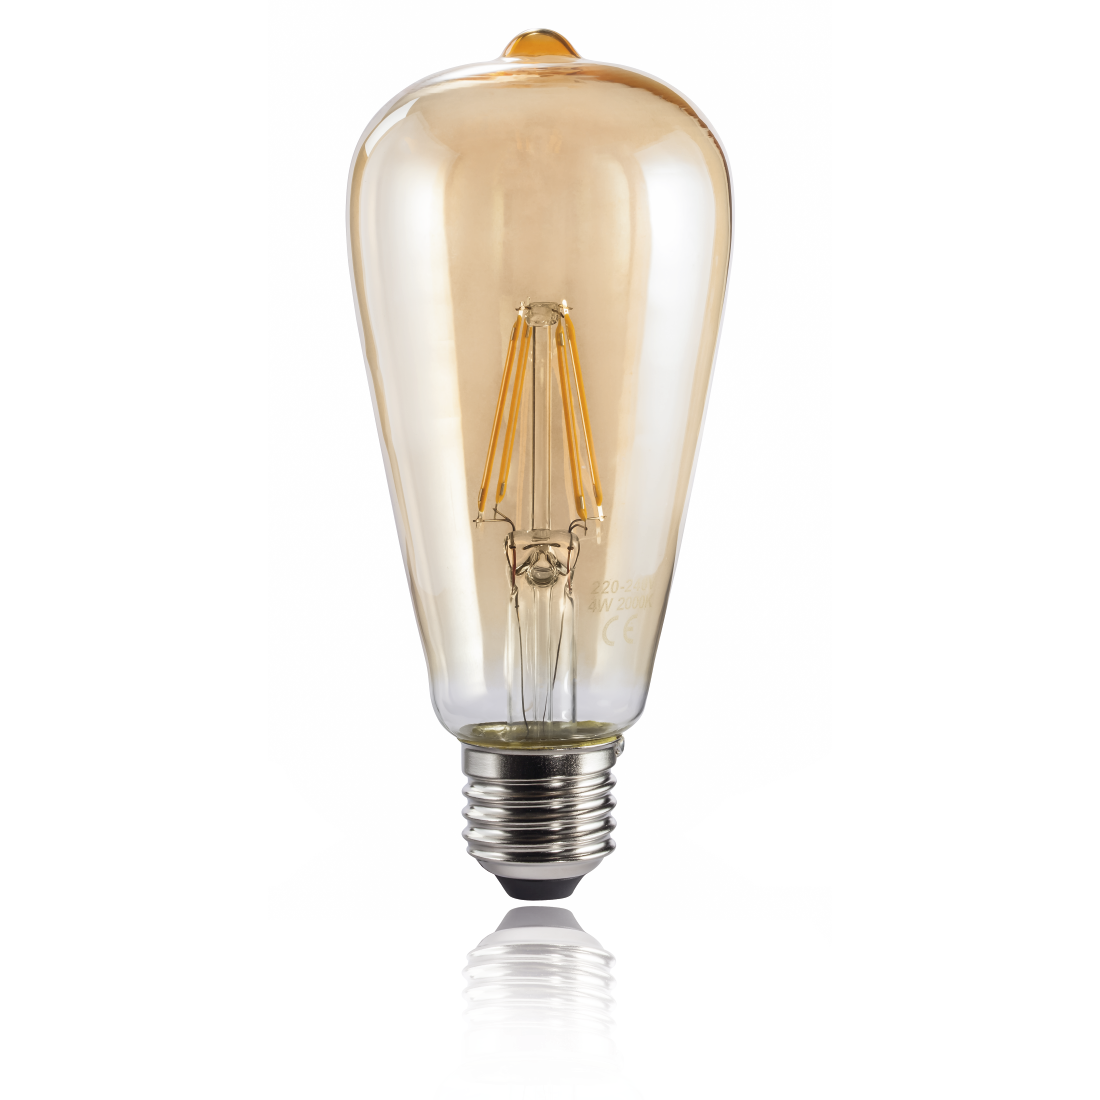 abx2 High-Res Image 2 - Xavax, LED Filament, E27, 410 lm Replaces 36 W, Vintage Bulb, amber, warm white